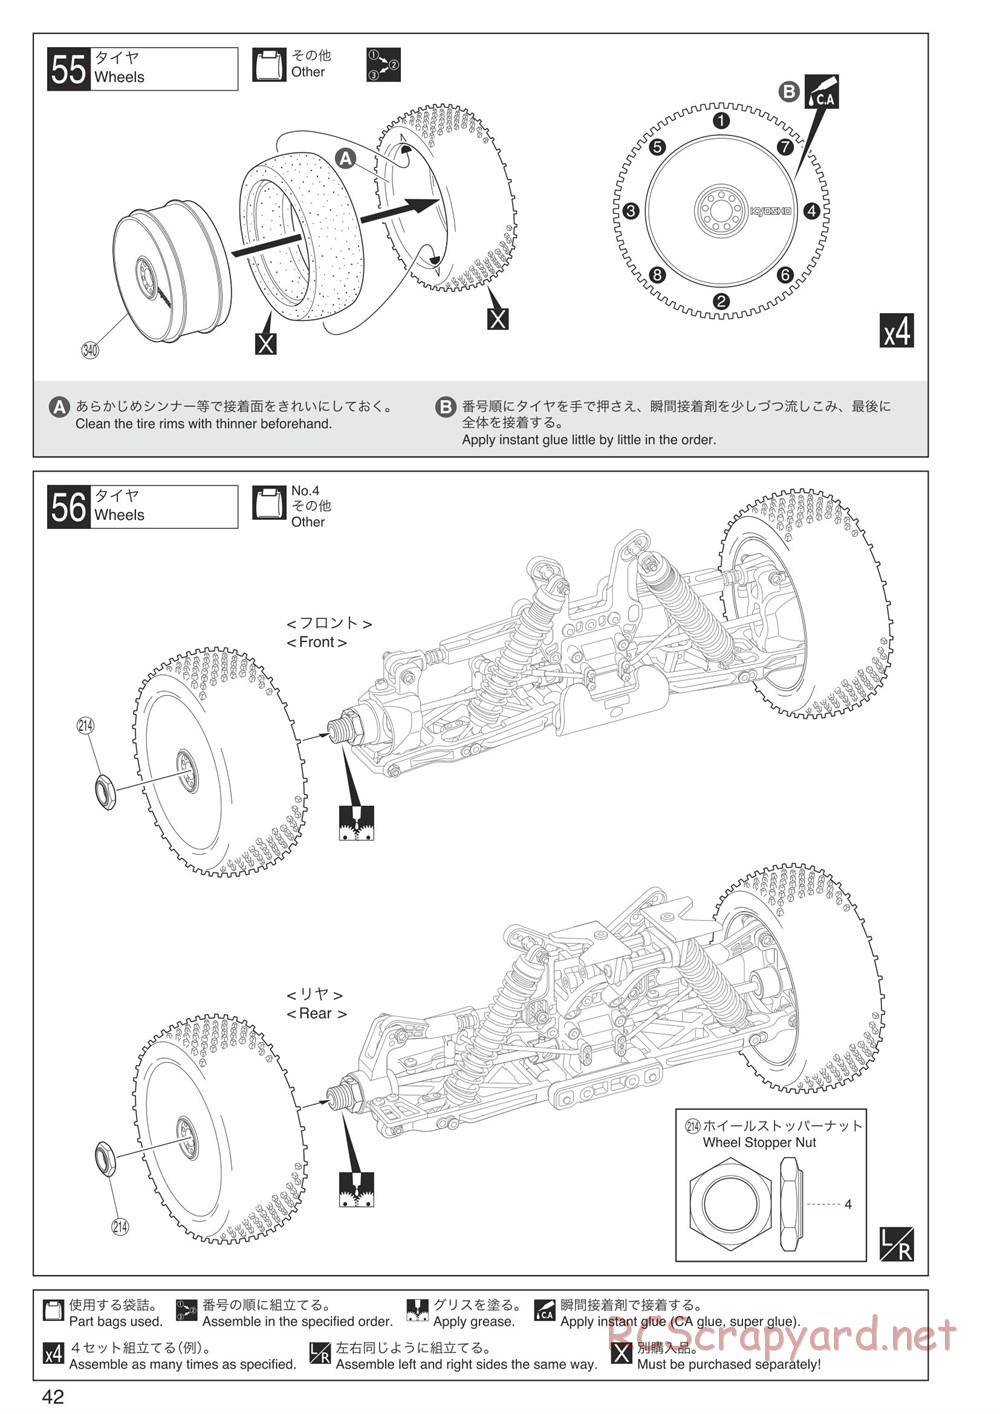 Kyosho - Inferno MP9 TKI4 10th Anniversary Special Edition - Manual - Page 42